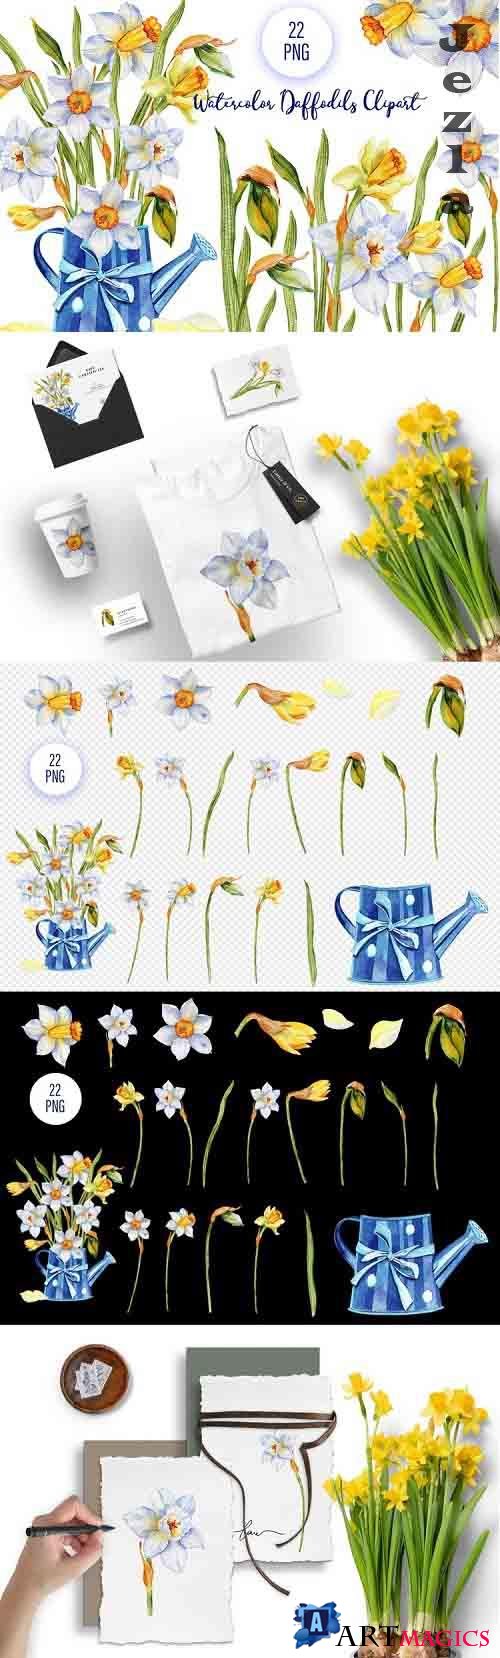 Daffodils watercolor blue flowers clipart - 1262501